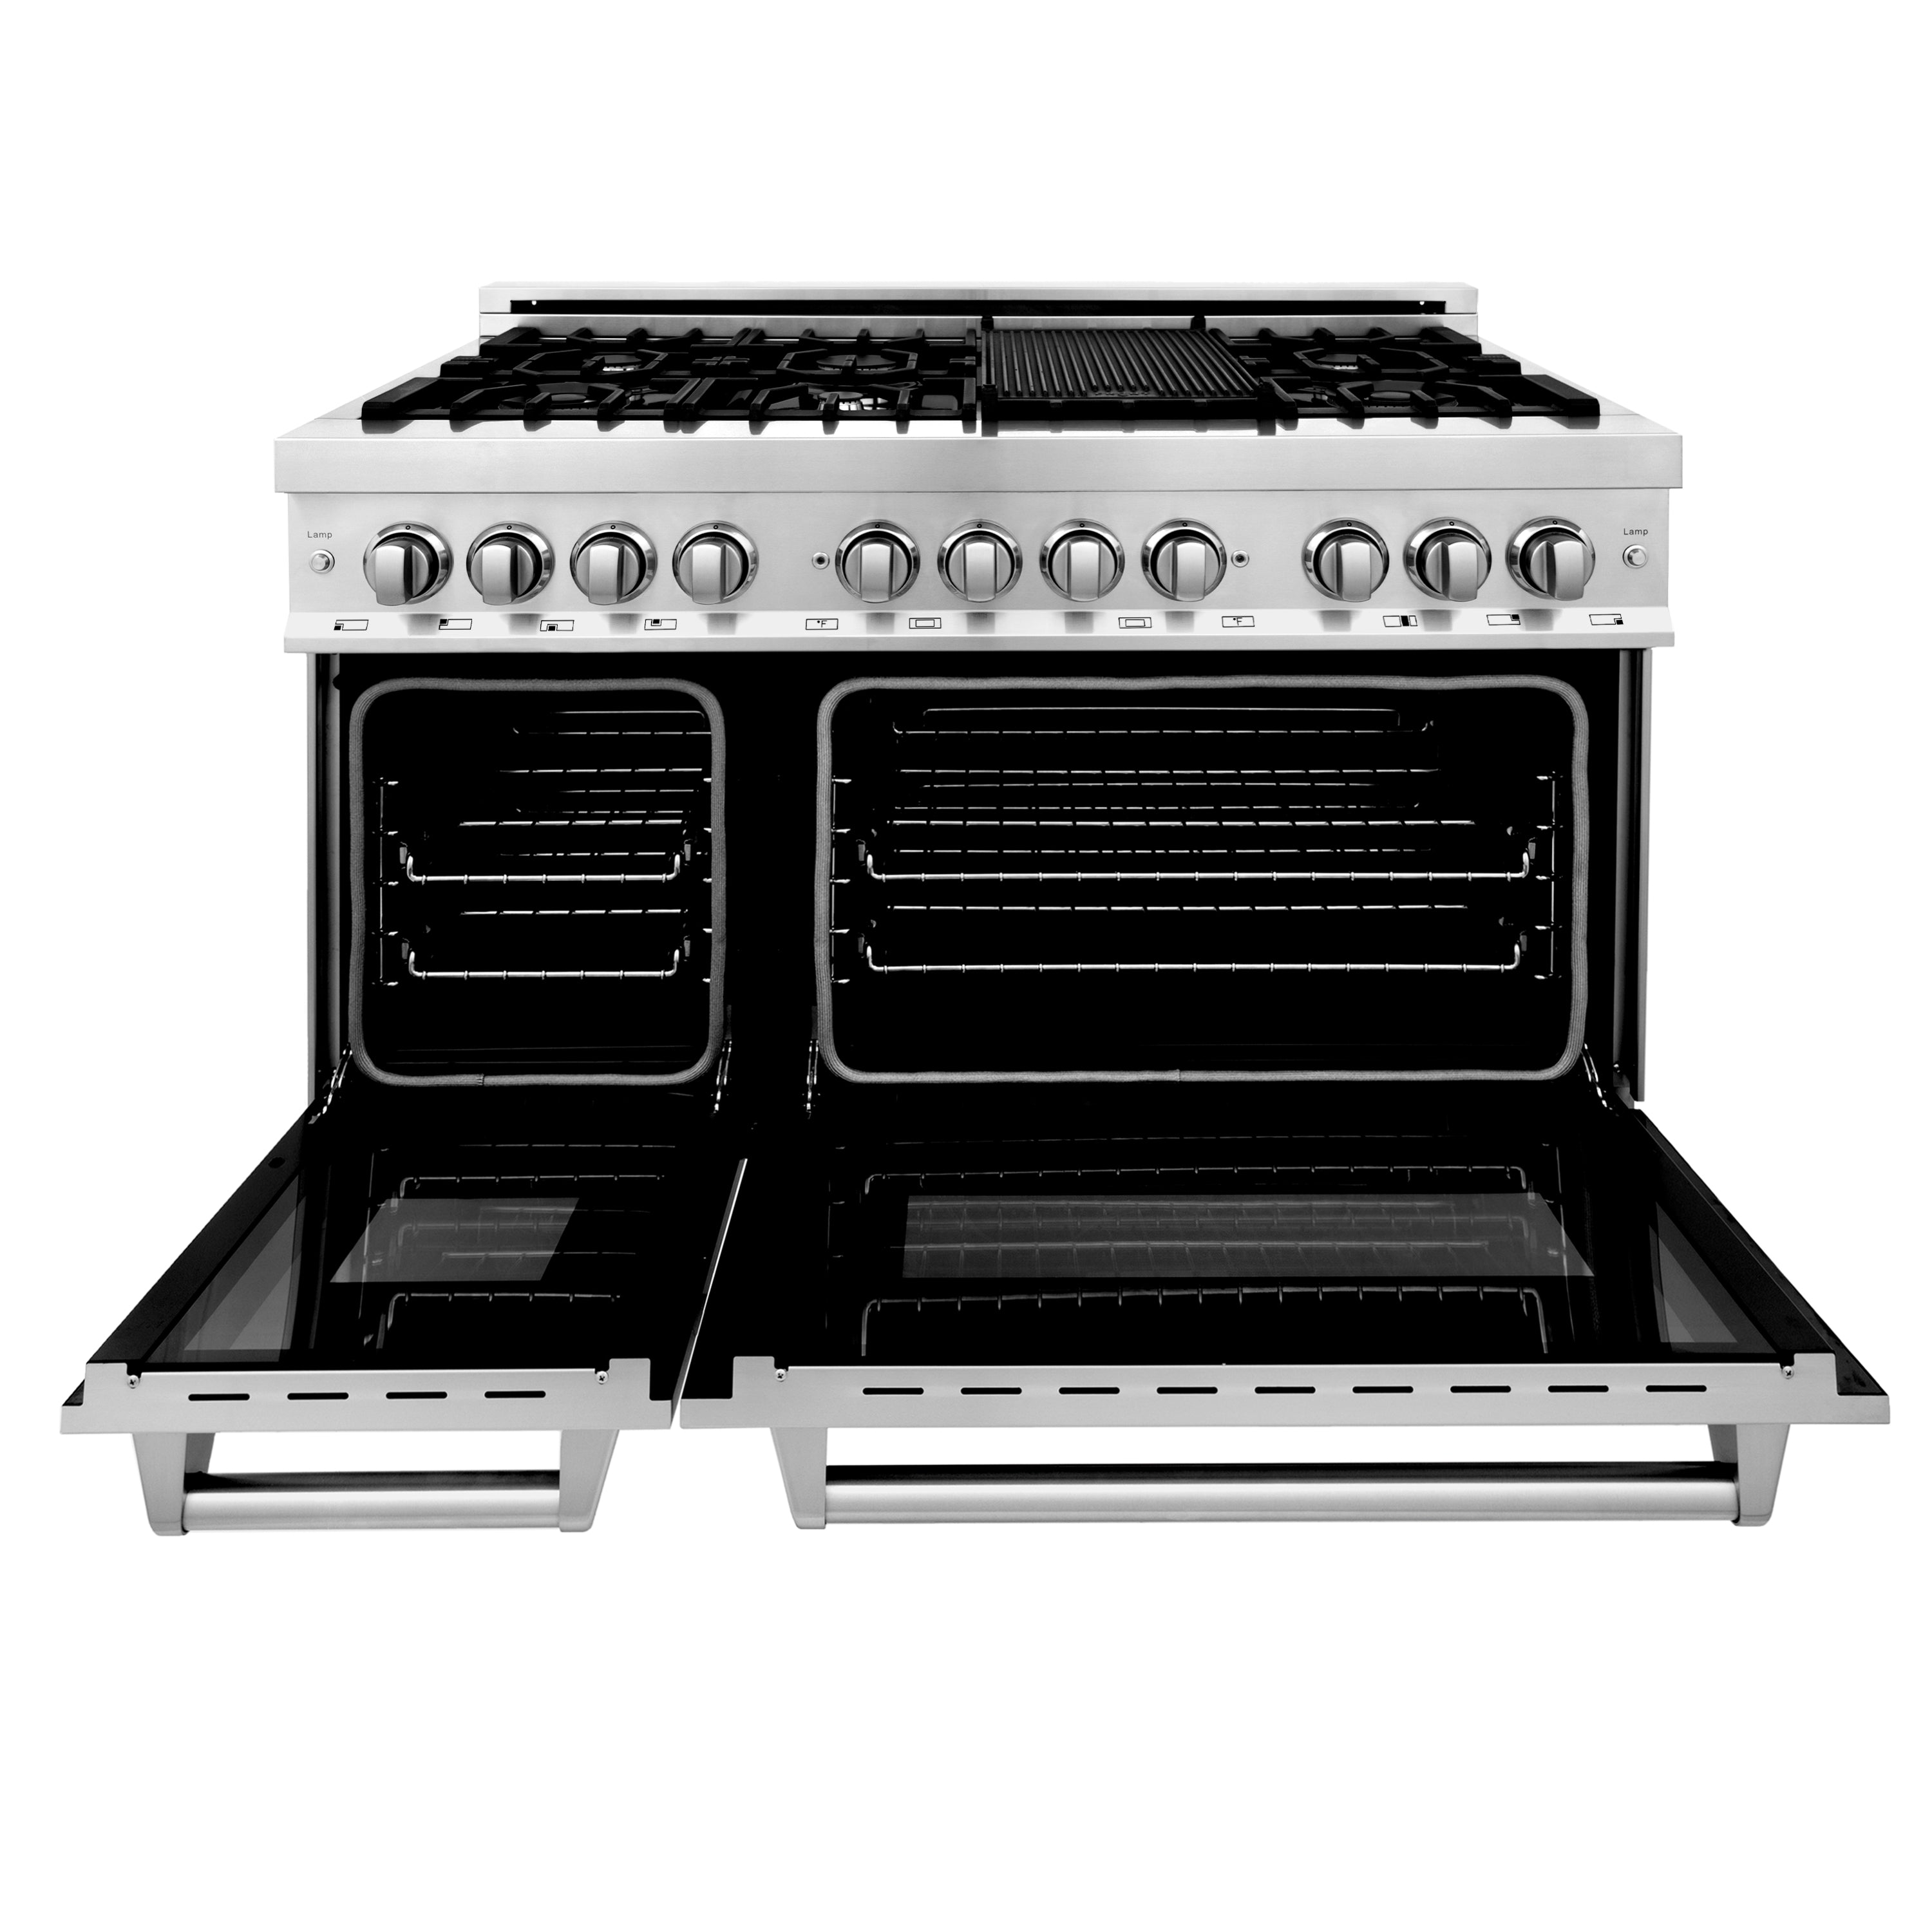 ZLINE 48" 6.0 cu. ft. Electric Oven and Gas Cooktop Dual Fuel Range with Griddle in Stainless Steel (RA-GR-48)